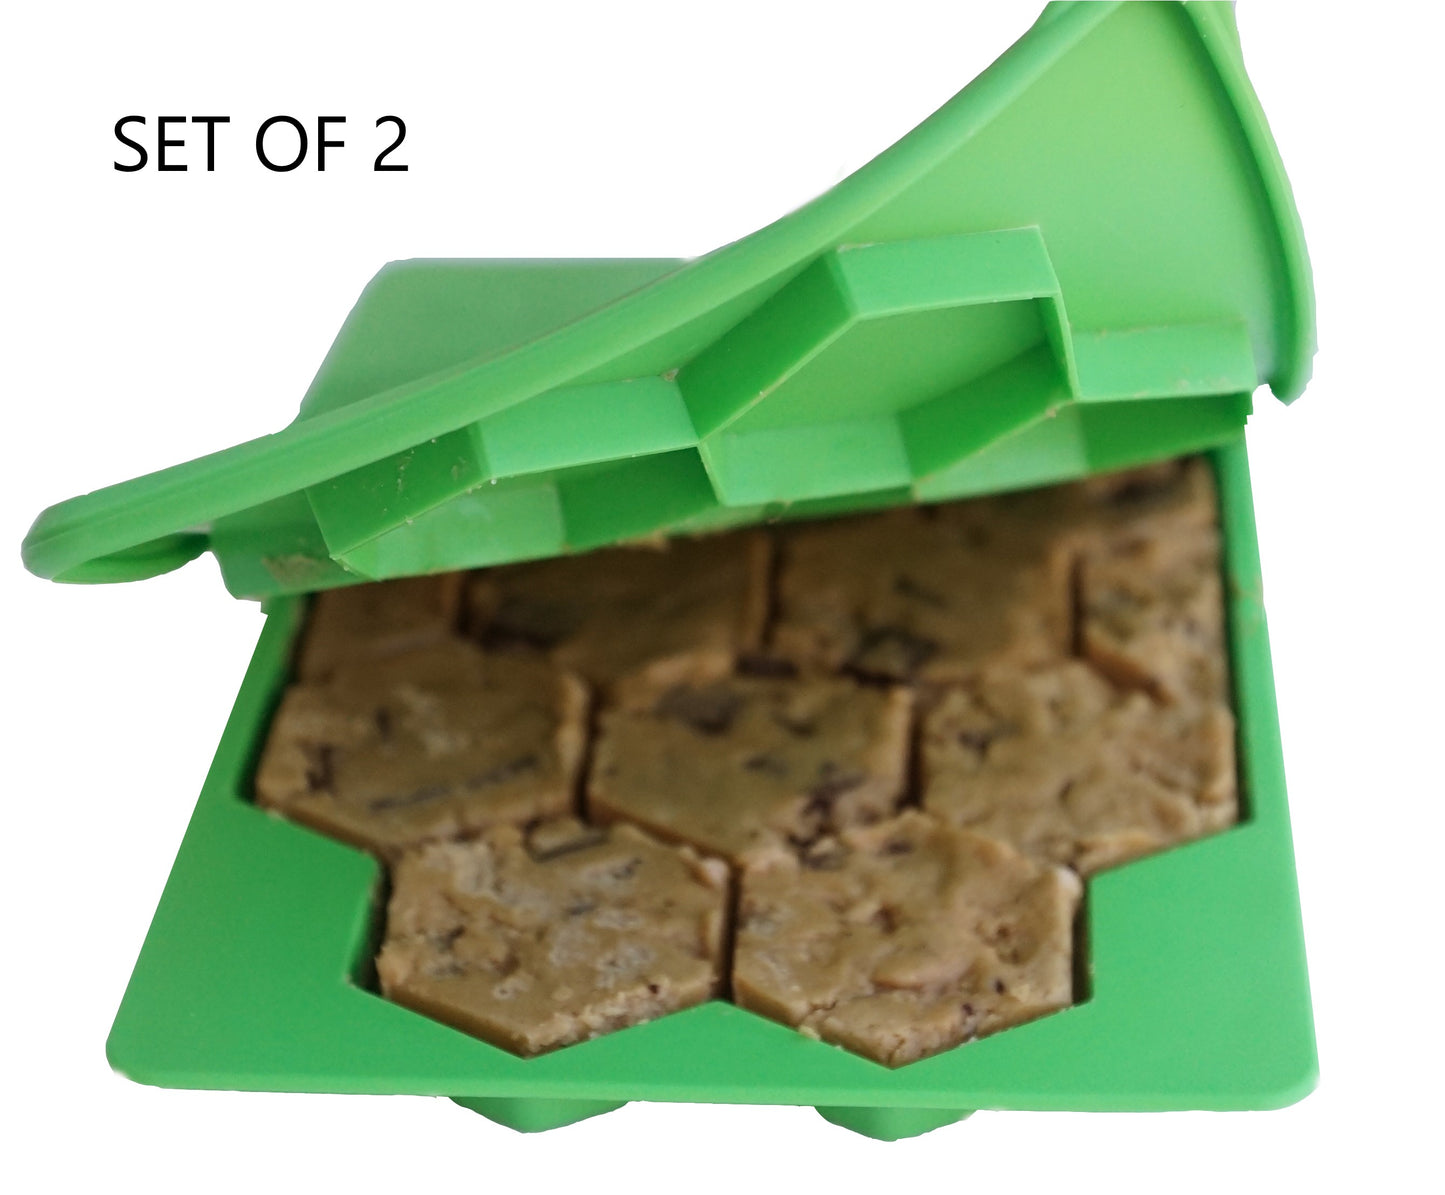 The Smart Cookie set of 2